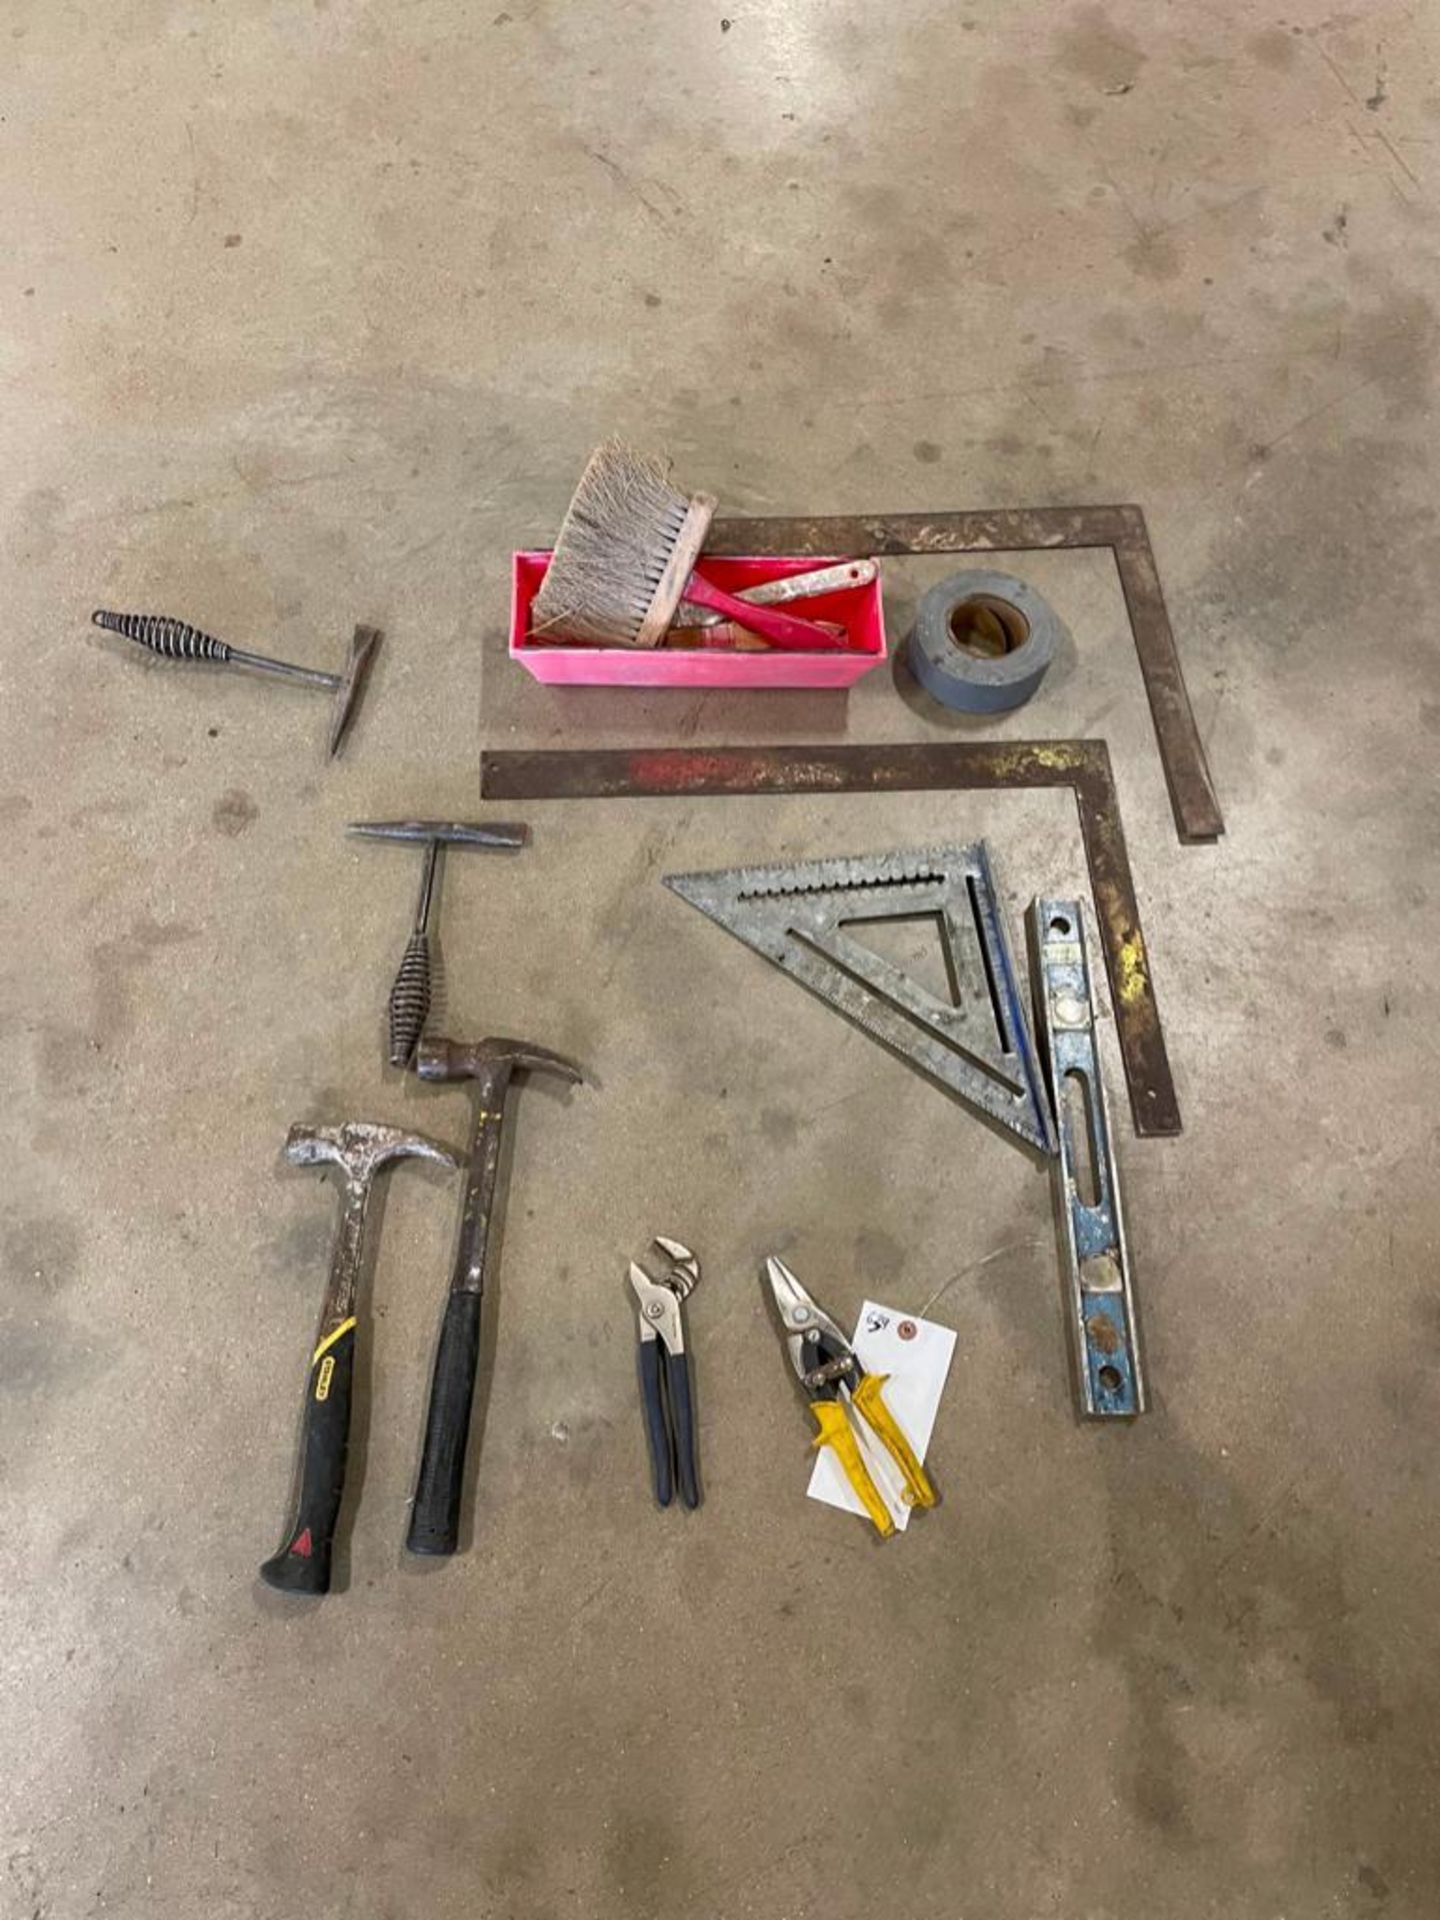 Miscellaneous Tools, Hammers, Level, Squares, etc. Located in Hazelwood, MO